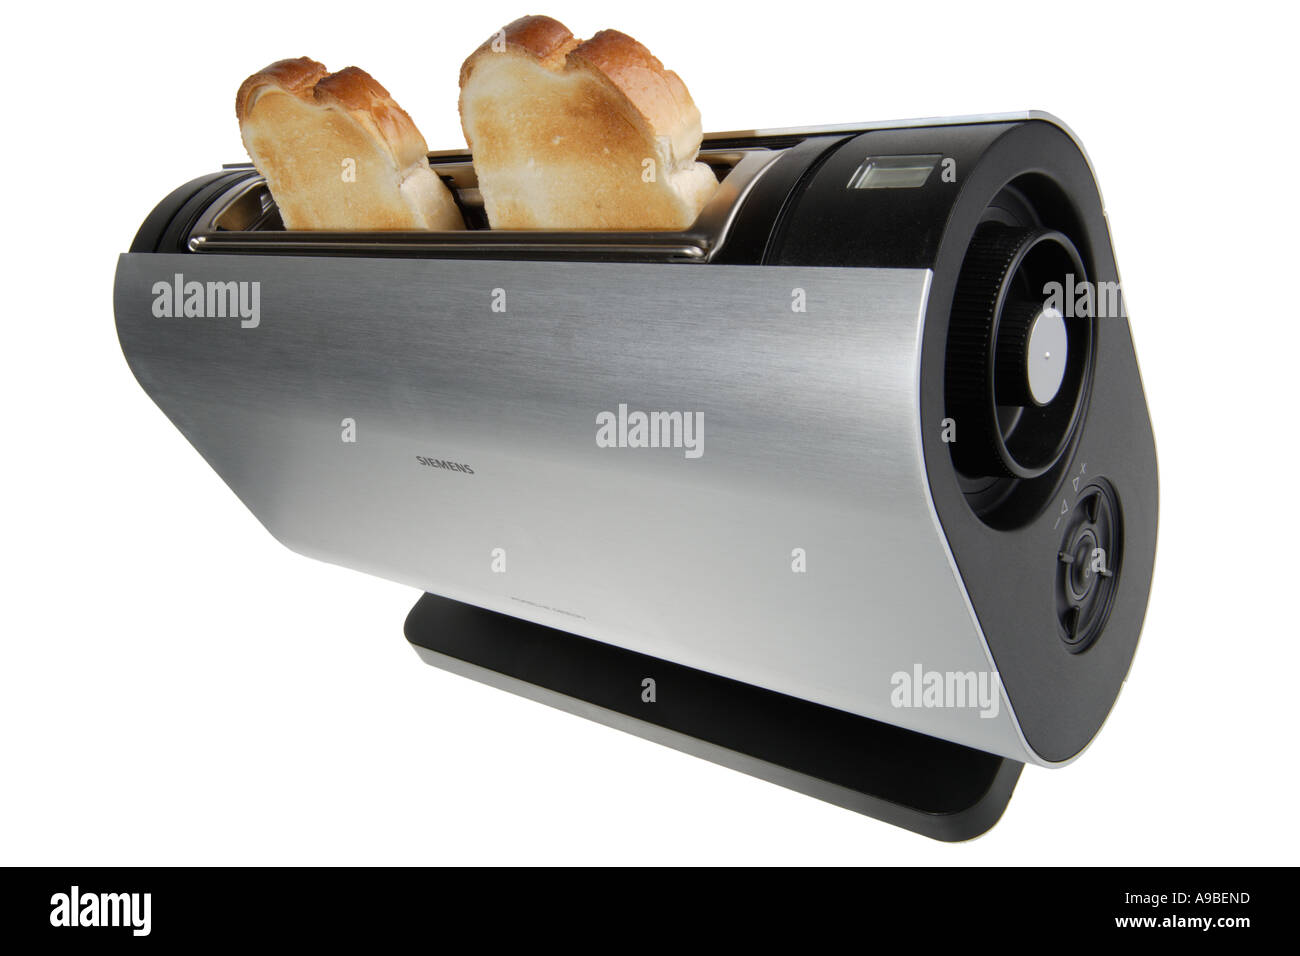 Porsche designed Siemens toaster and two slices toast Stock Photo - Alamy